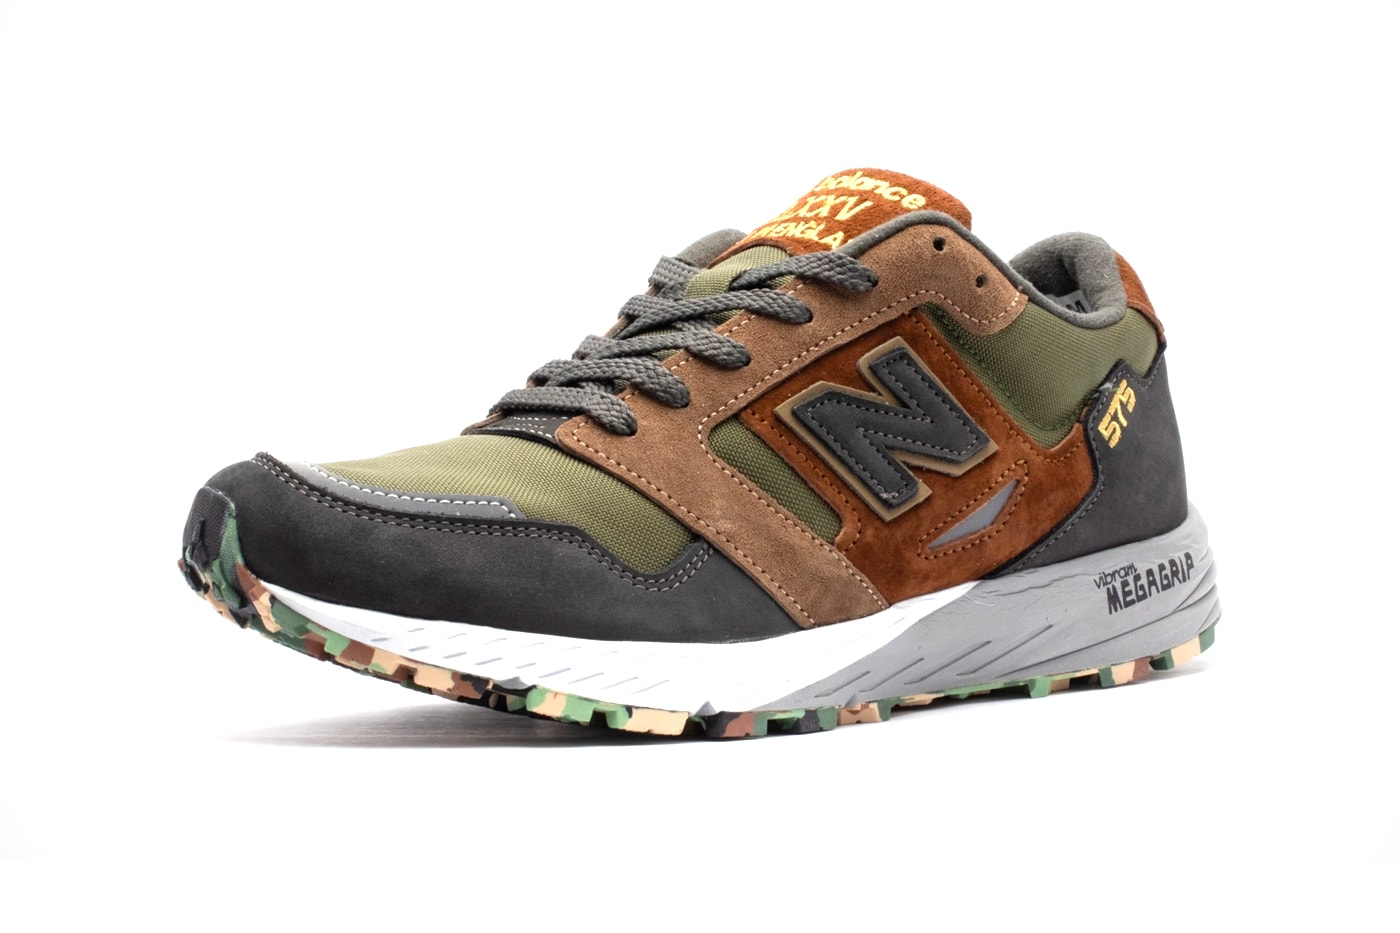 New Balance MTL575SO Camo Pack sneakers footwear shoes trainers runners vibram sole camouflage military filmby cumbria handmade